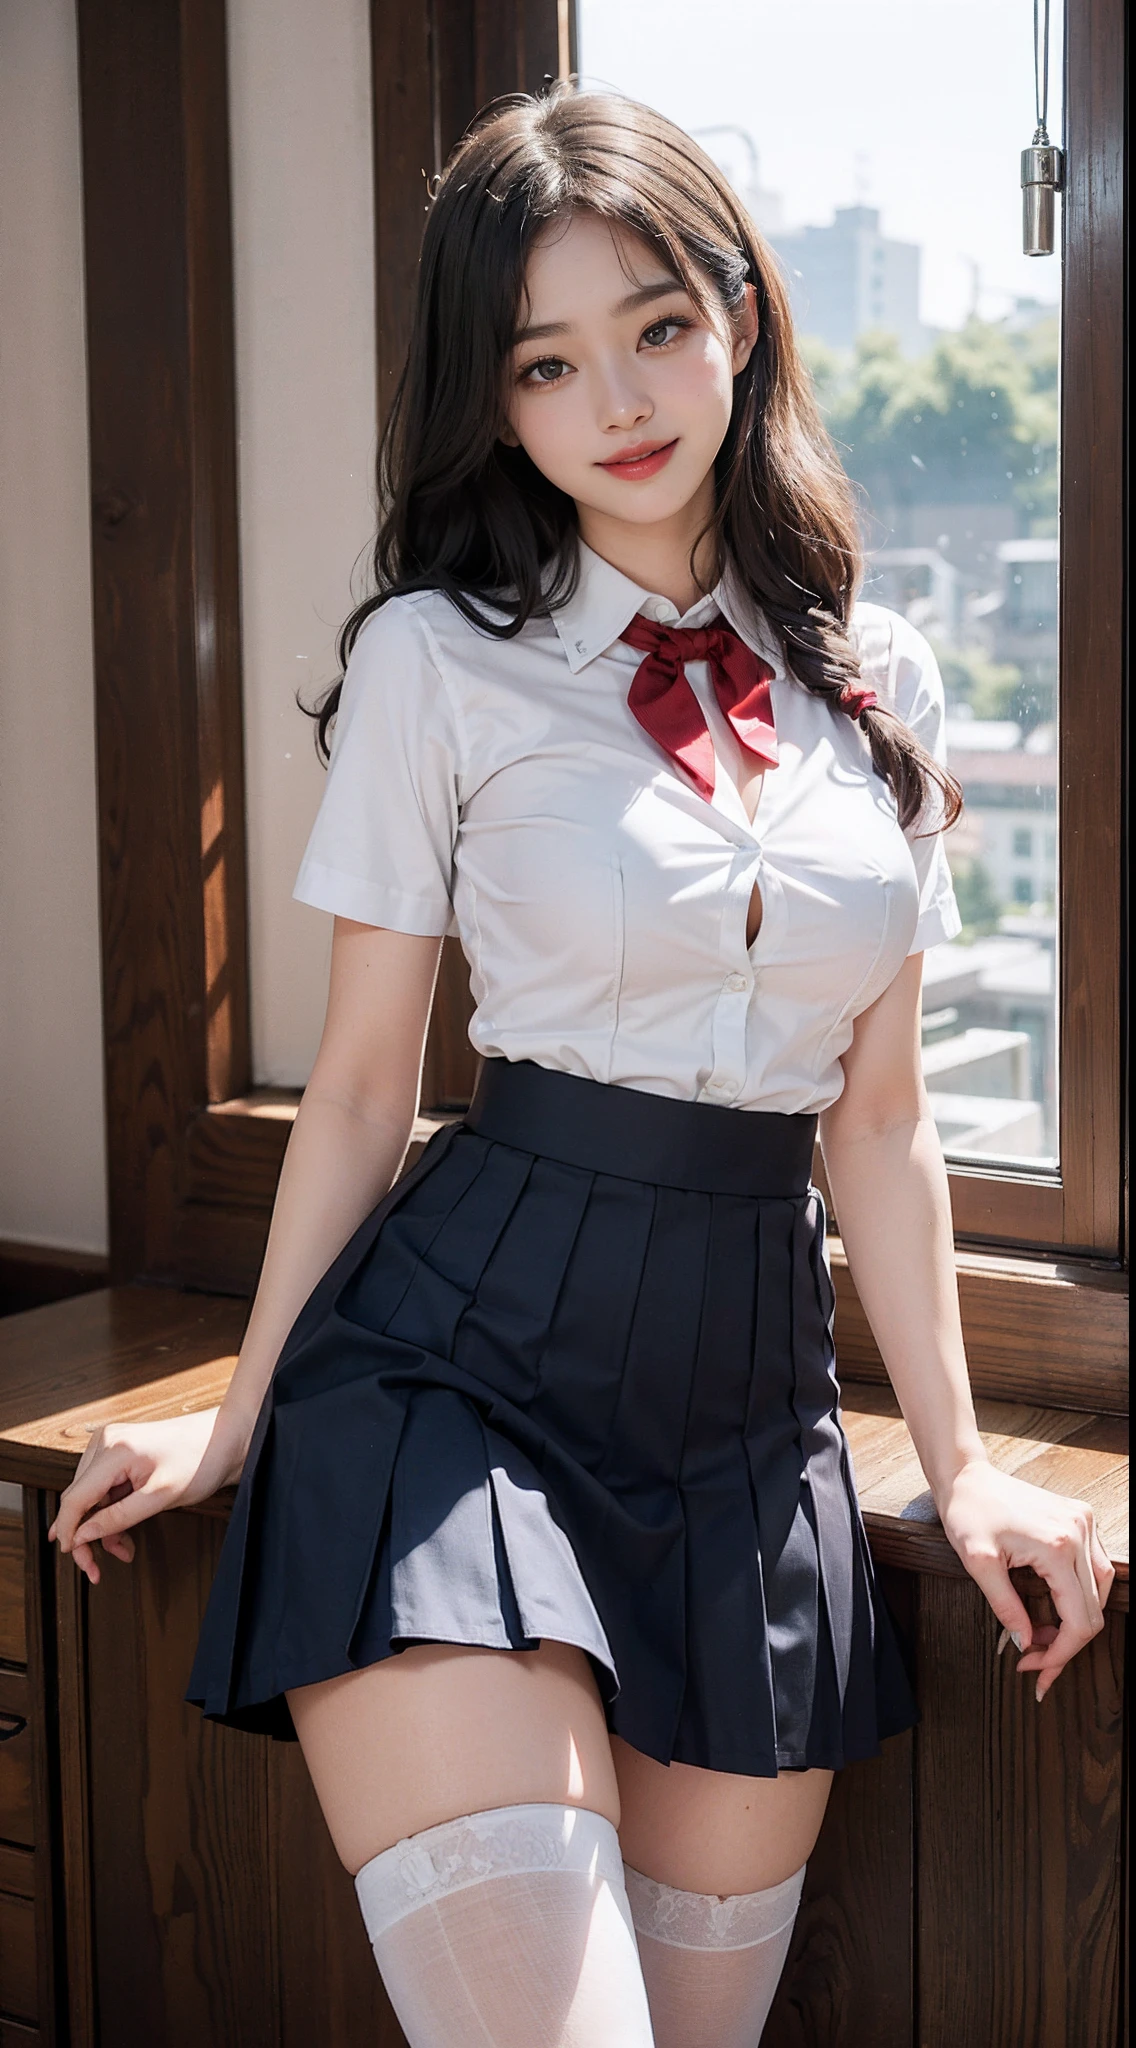 Korean School Uniform, White and Blue Summer  Shirt, belly is visible、Ribbon Ties, Short skirts, School Classroom, School stairs,  8k RAW photo, hight resolution, Cool 19 year old woman、busty girl, Open shirt has cleavage, beautiful eyes in detail, long eyeslashes, Slender eyes, elongated eye shape, Sanpaku eyes, grinning evily, Evil expressions, Beautiful and very thin calves, Beautiful and thick thighs, Striped stockings，big wavy hair, Gravure Pose、miscievous smile